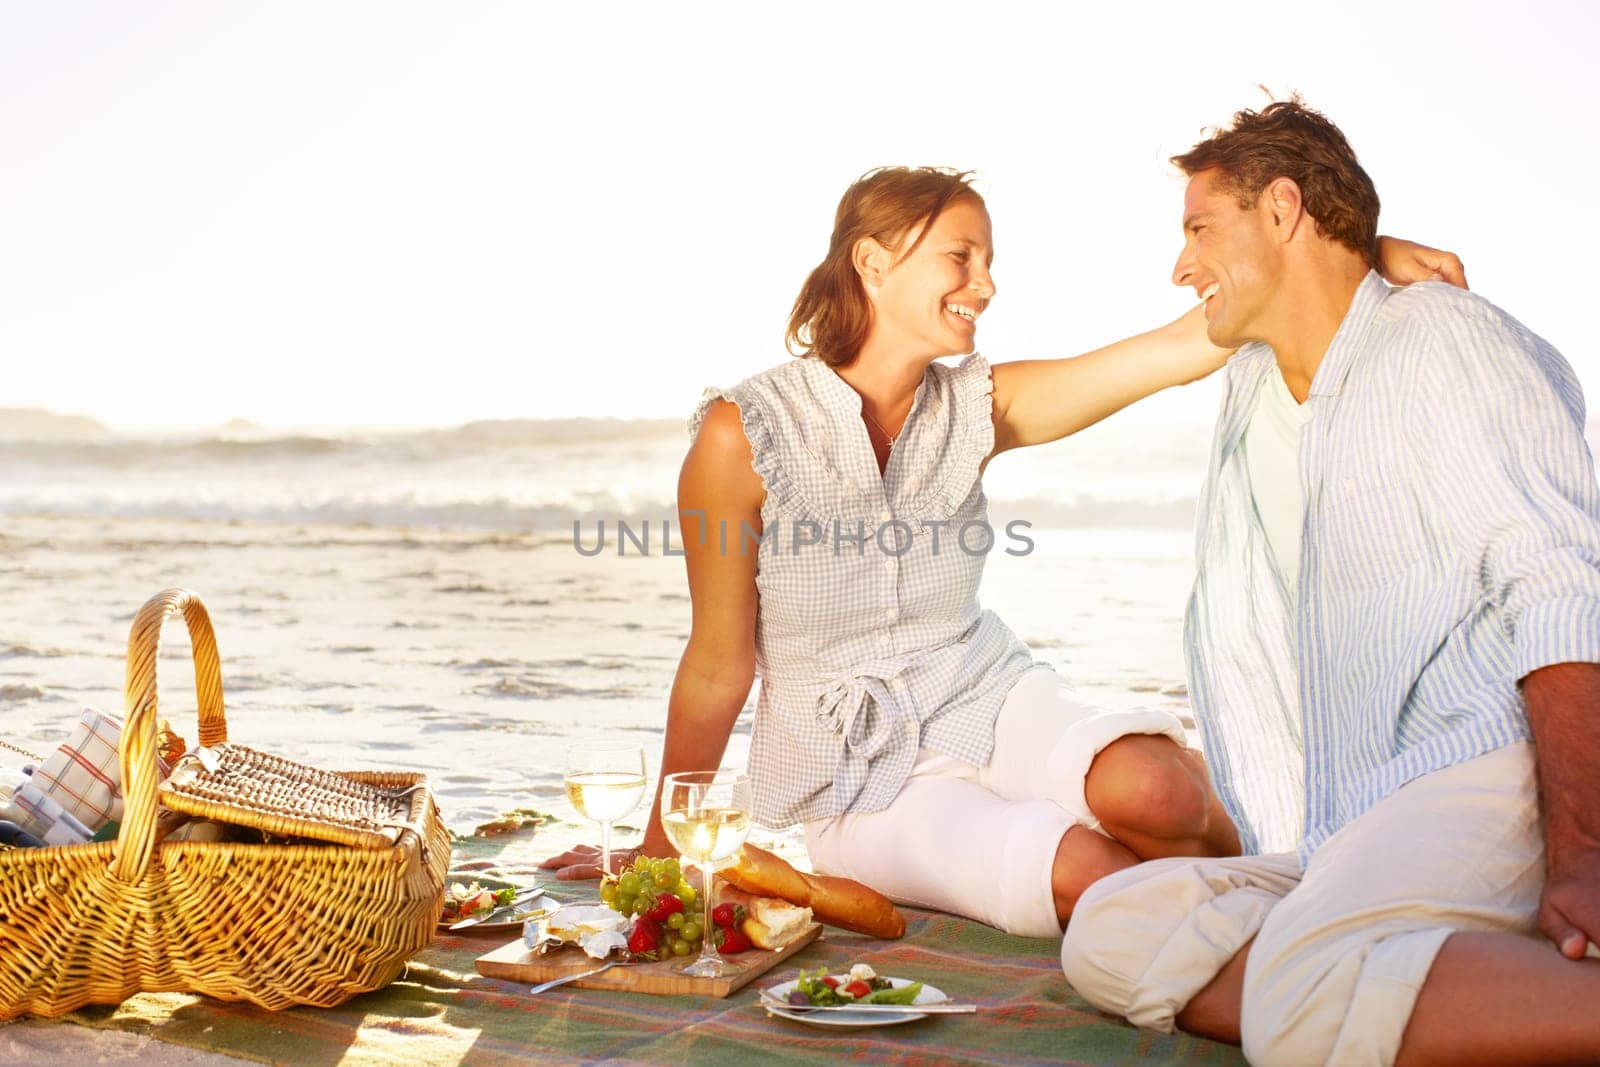 Romantic picnic at sunset. A loving mature couple enjoying a romantic picnic on the beach together. by YuriArcurs